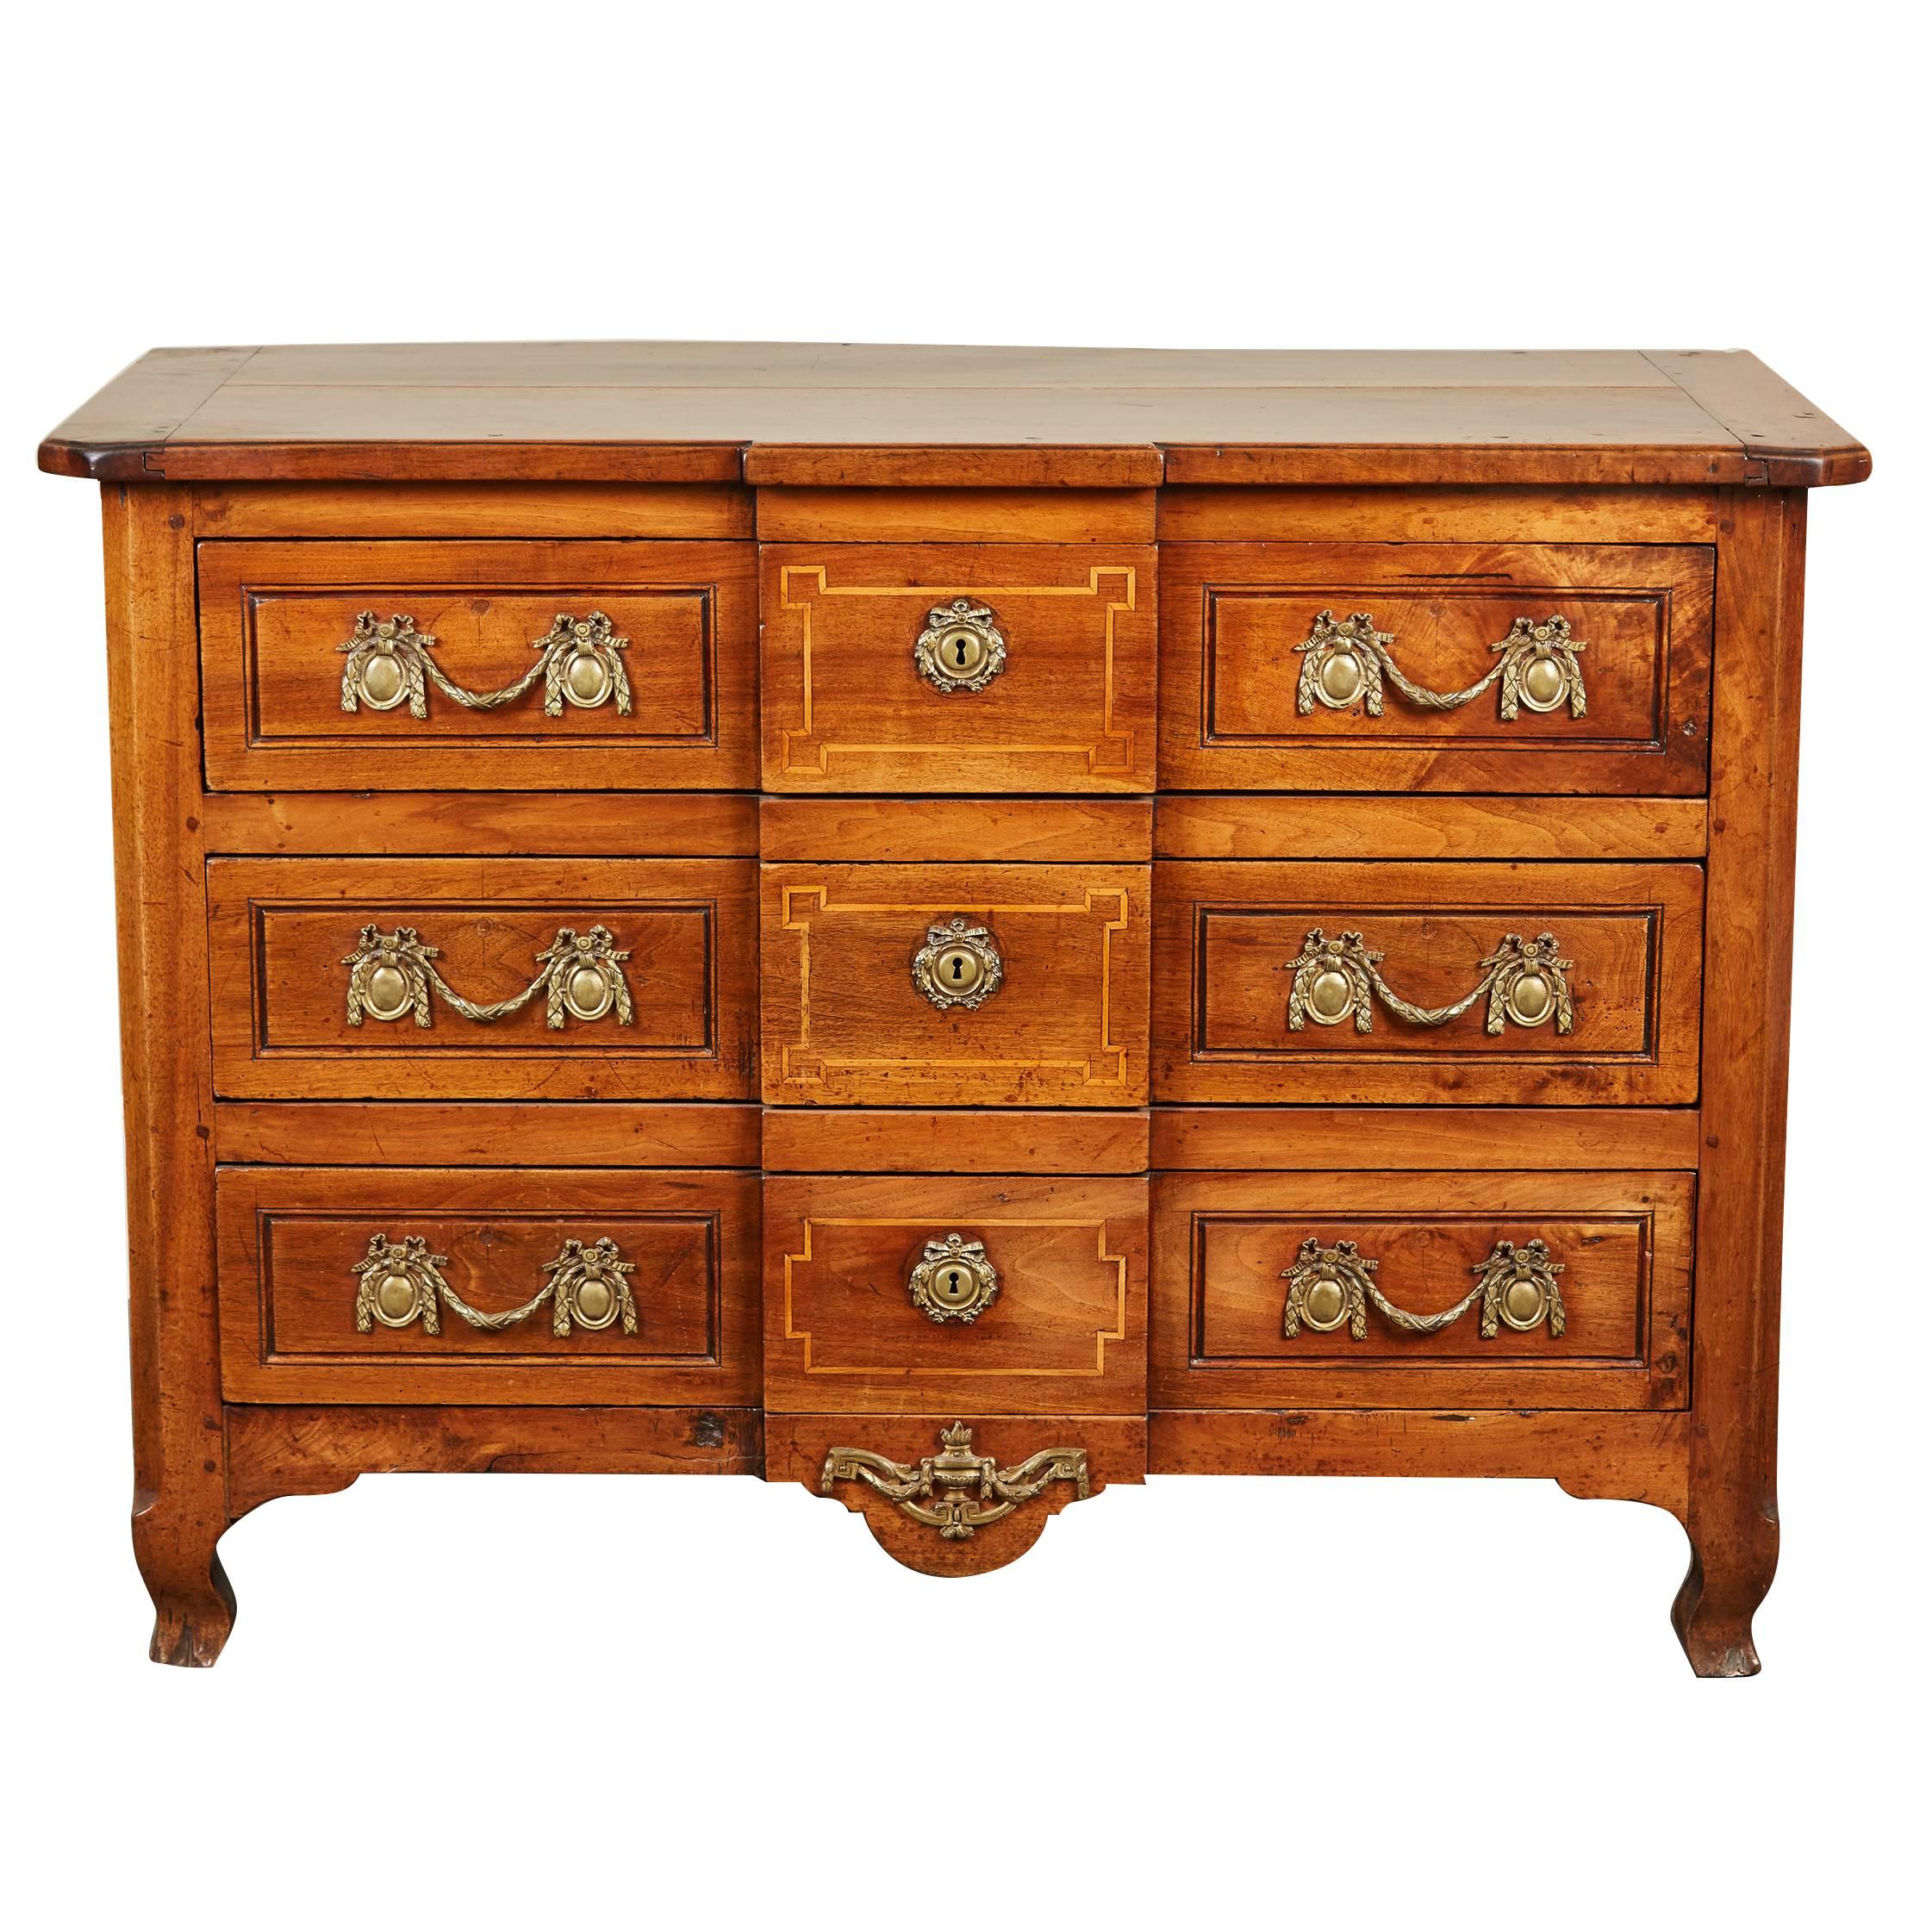 18th century French Louis XVI Walnut Chest of Drawers